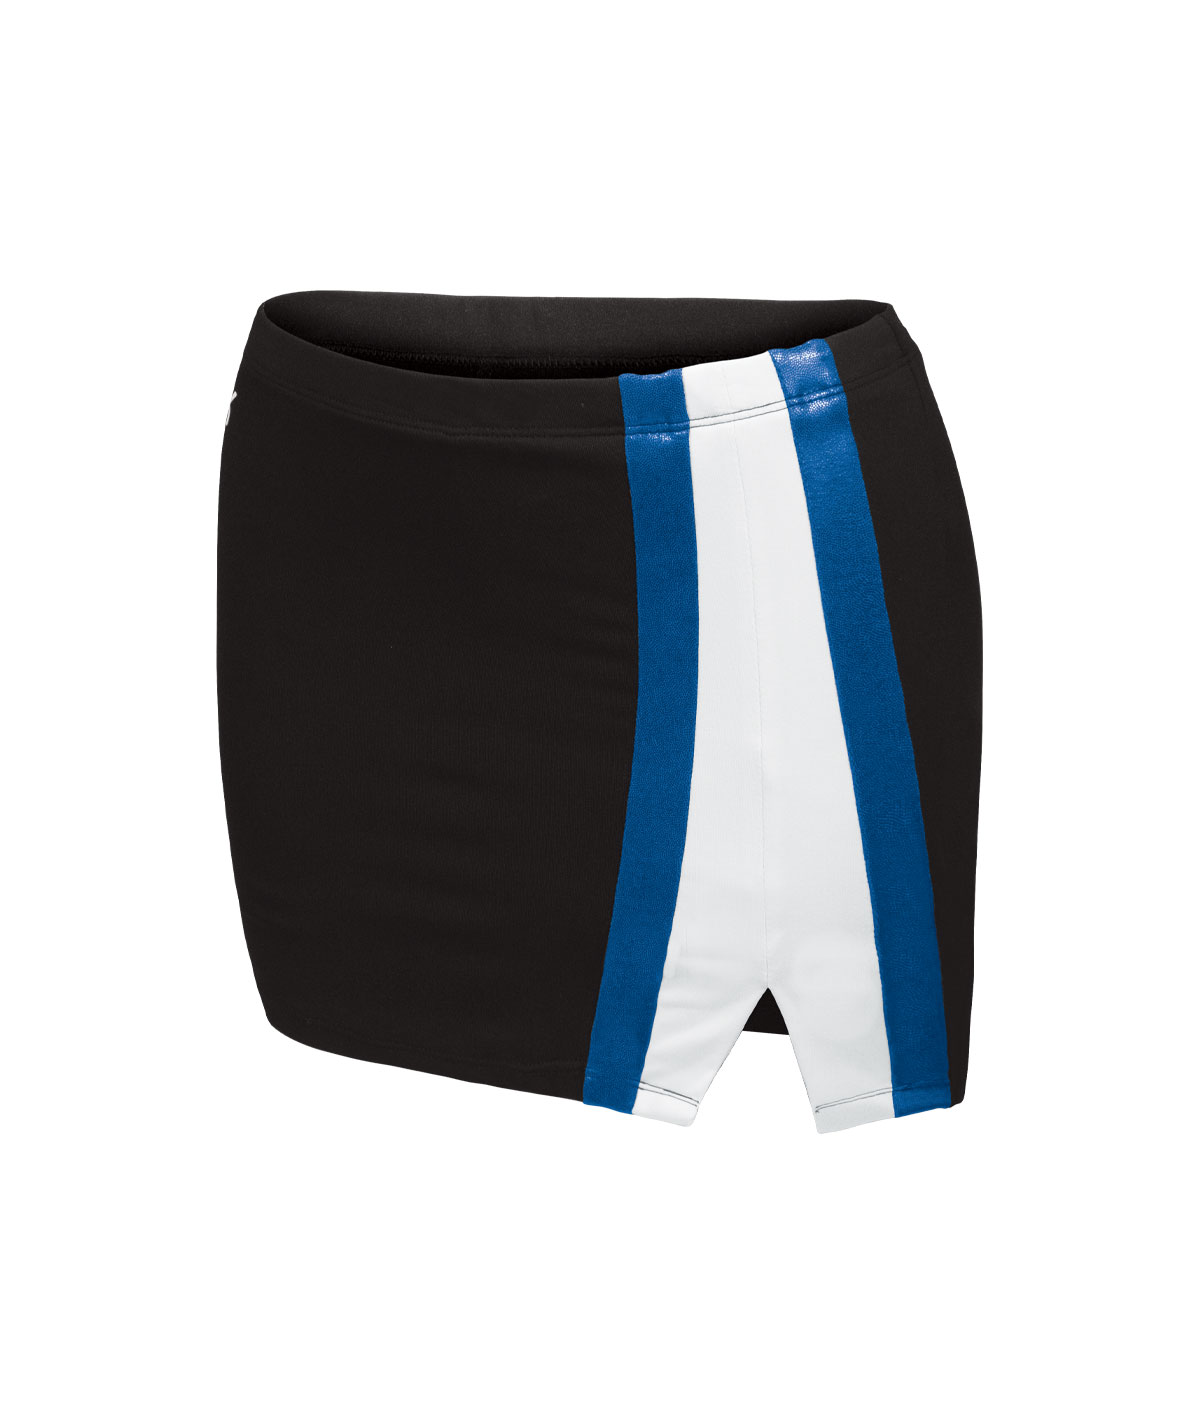 GK All Star Acclaim Iconic Skirt With Built-In Brief